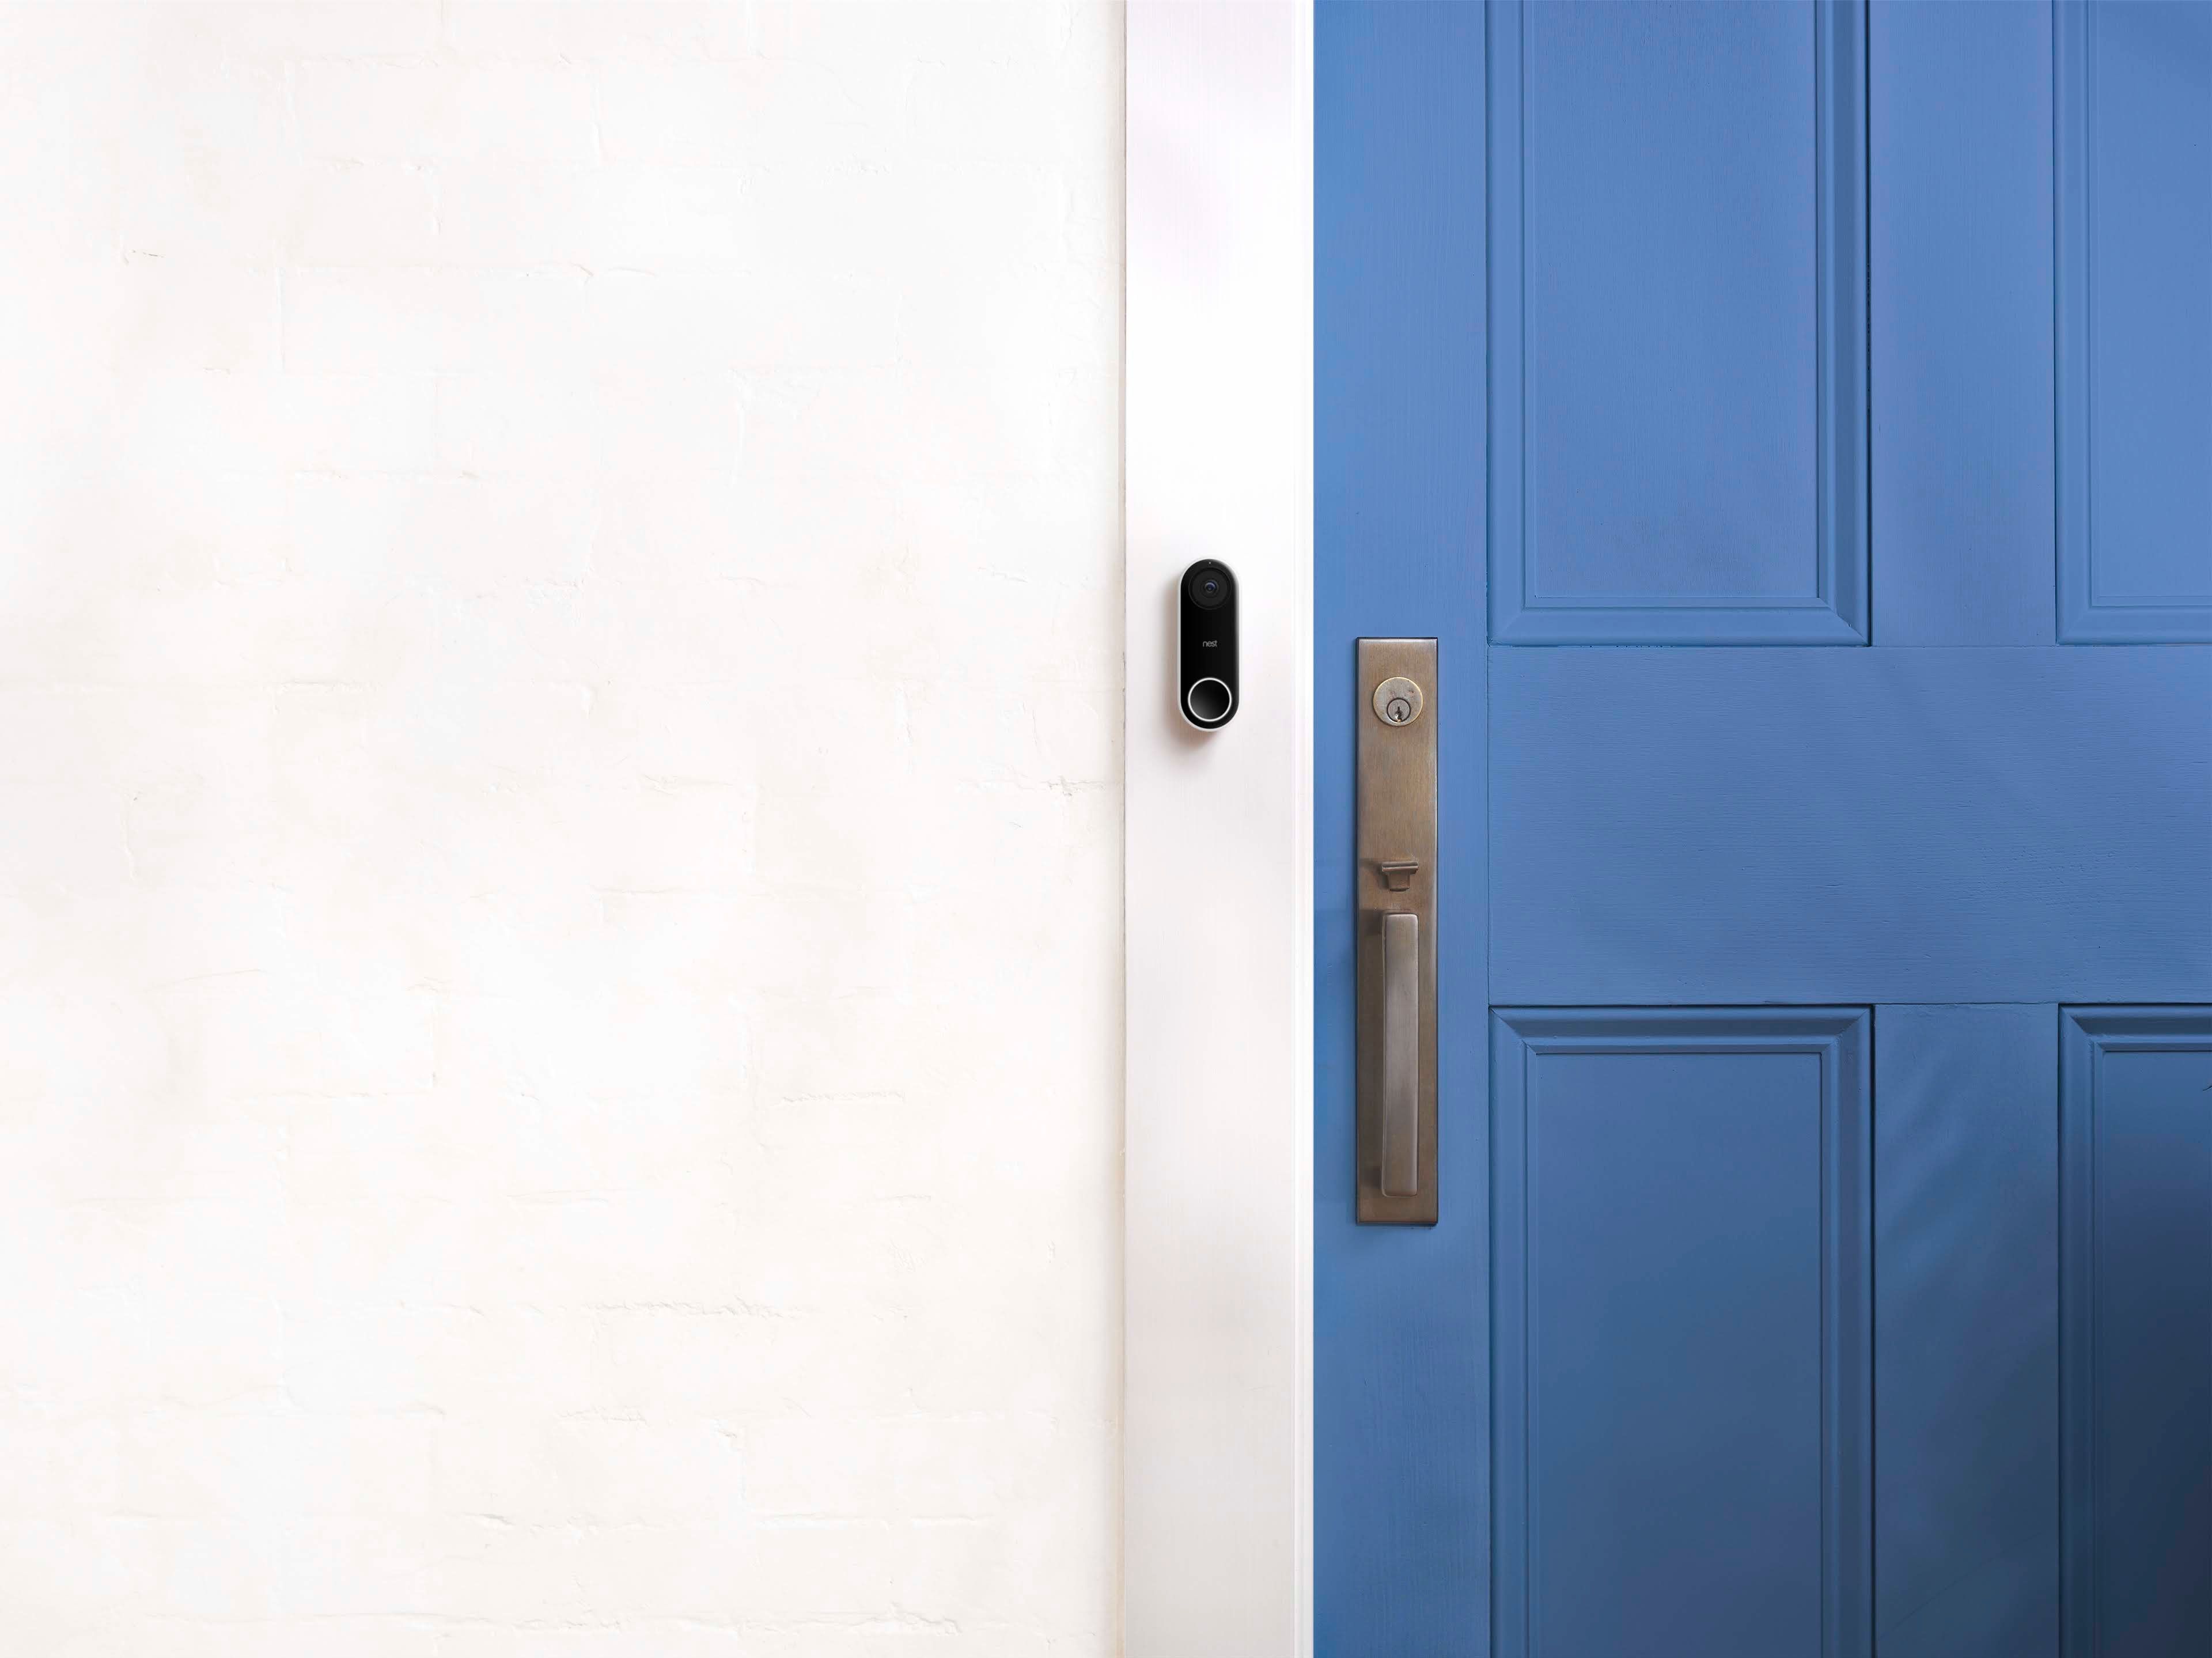 Blue door with a vide camera to the left on a white wall